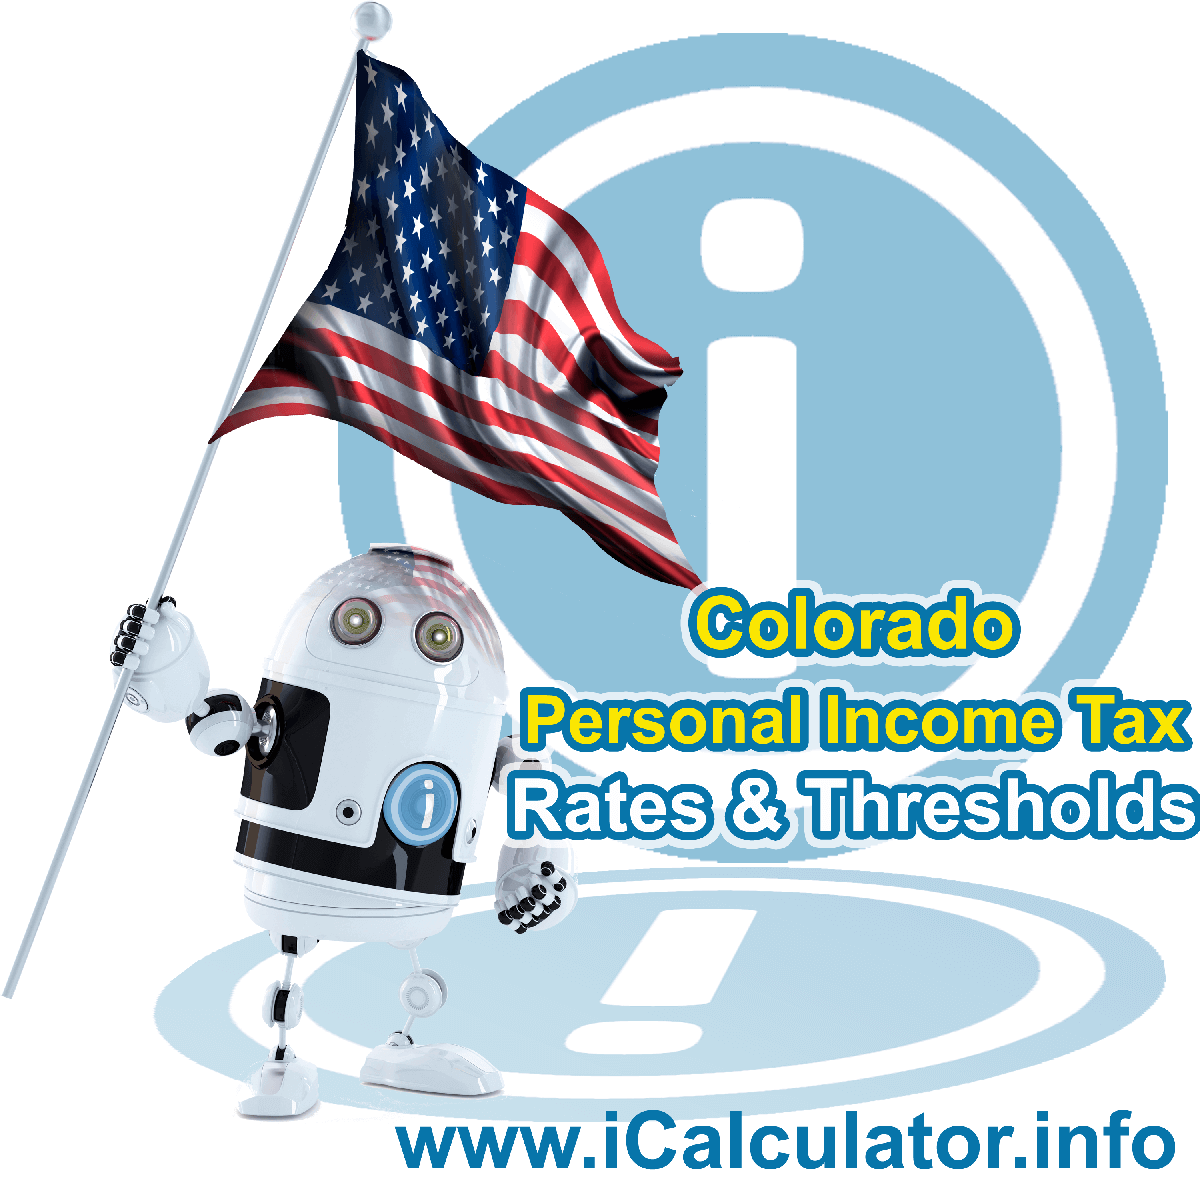 Colorado State Tax Tables 2014. This image displays details of the Colorado State Tax Tables for the 2014 tax return year which is provided in support of the 2014 US Tax Calculator